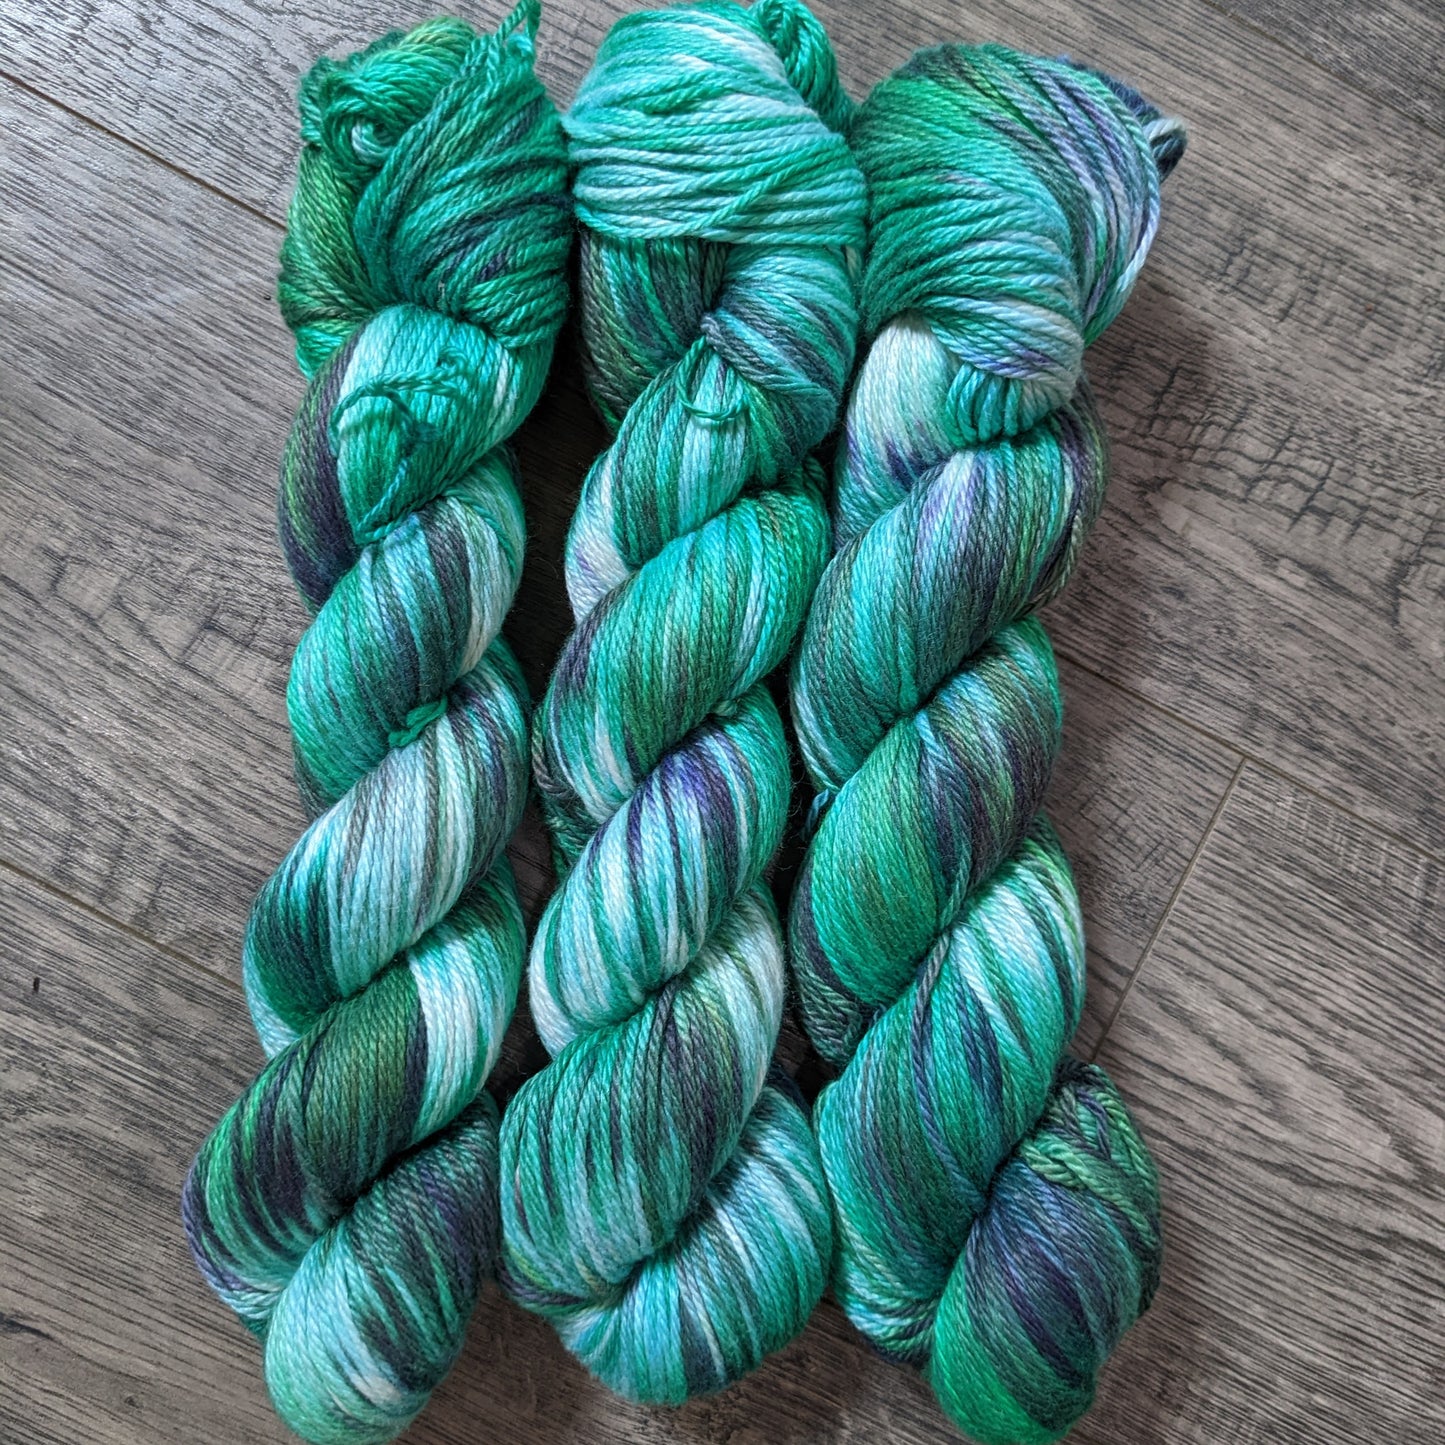 Judd Cove Collection: Worsted Weight